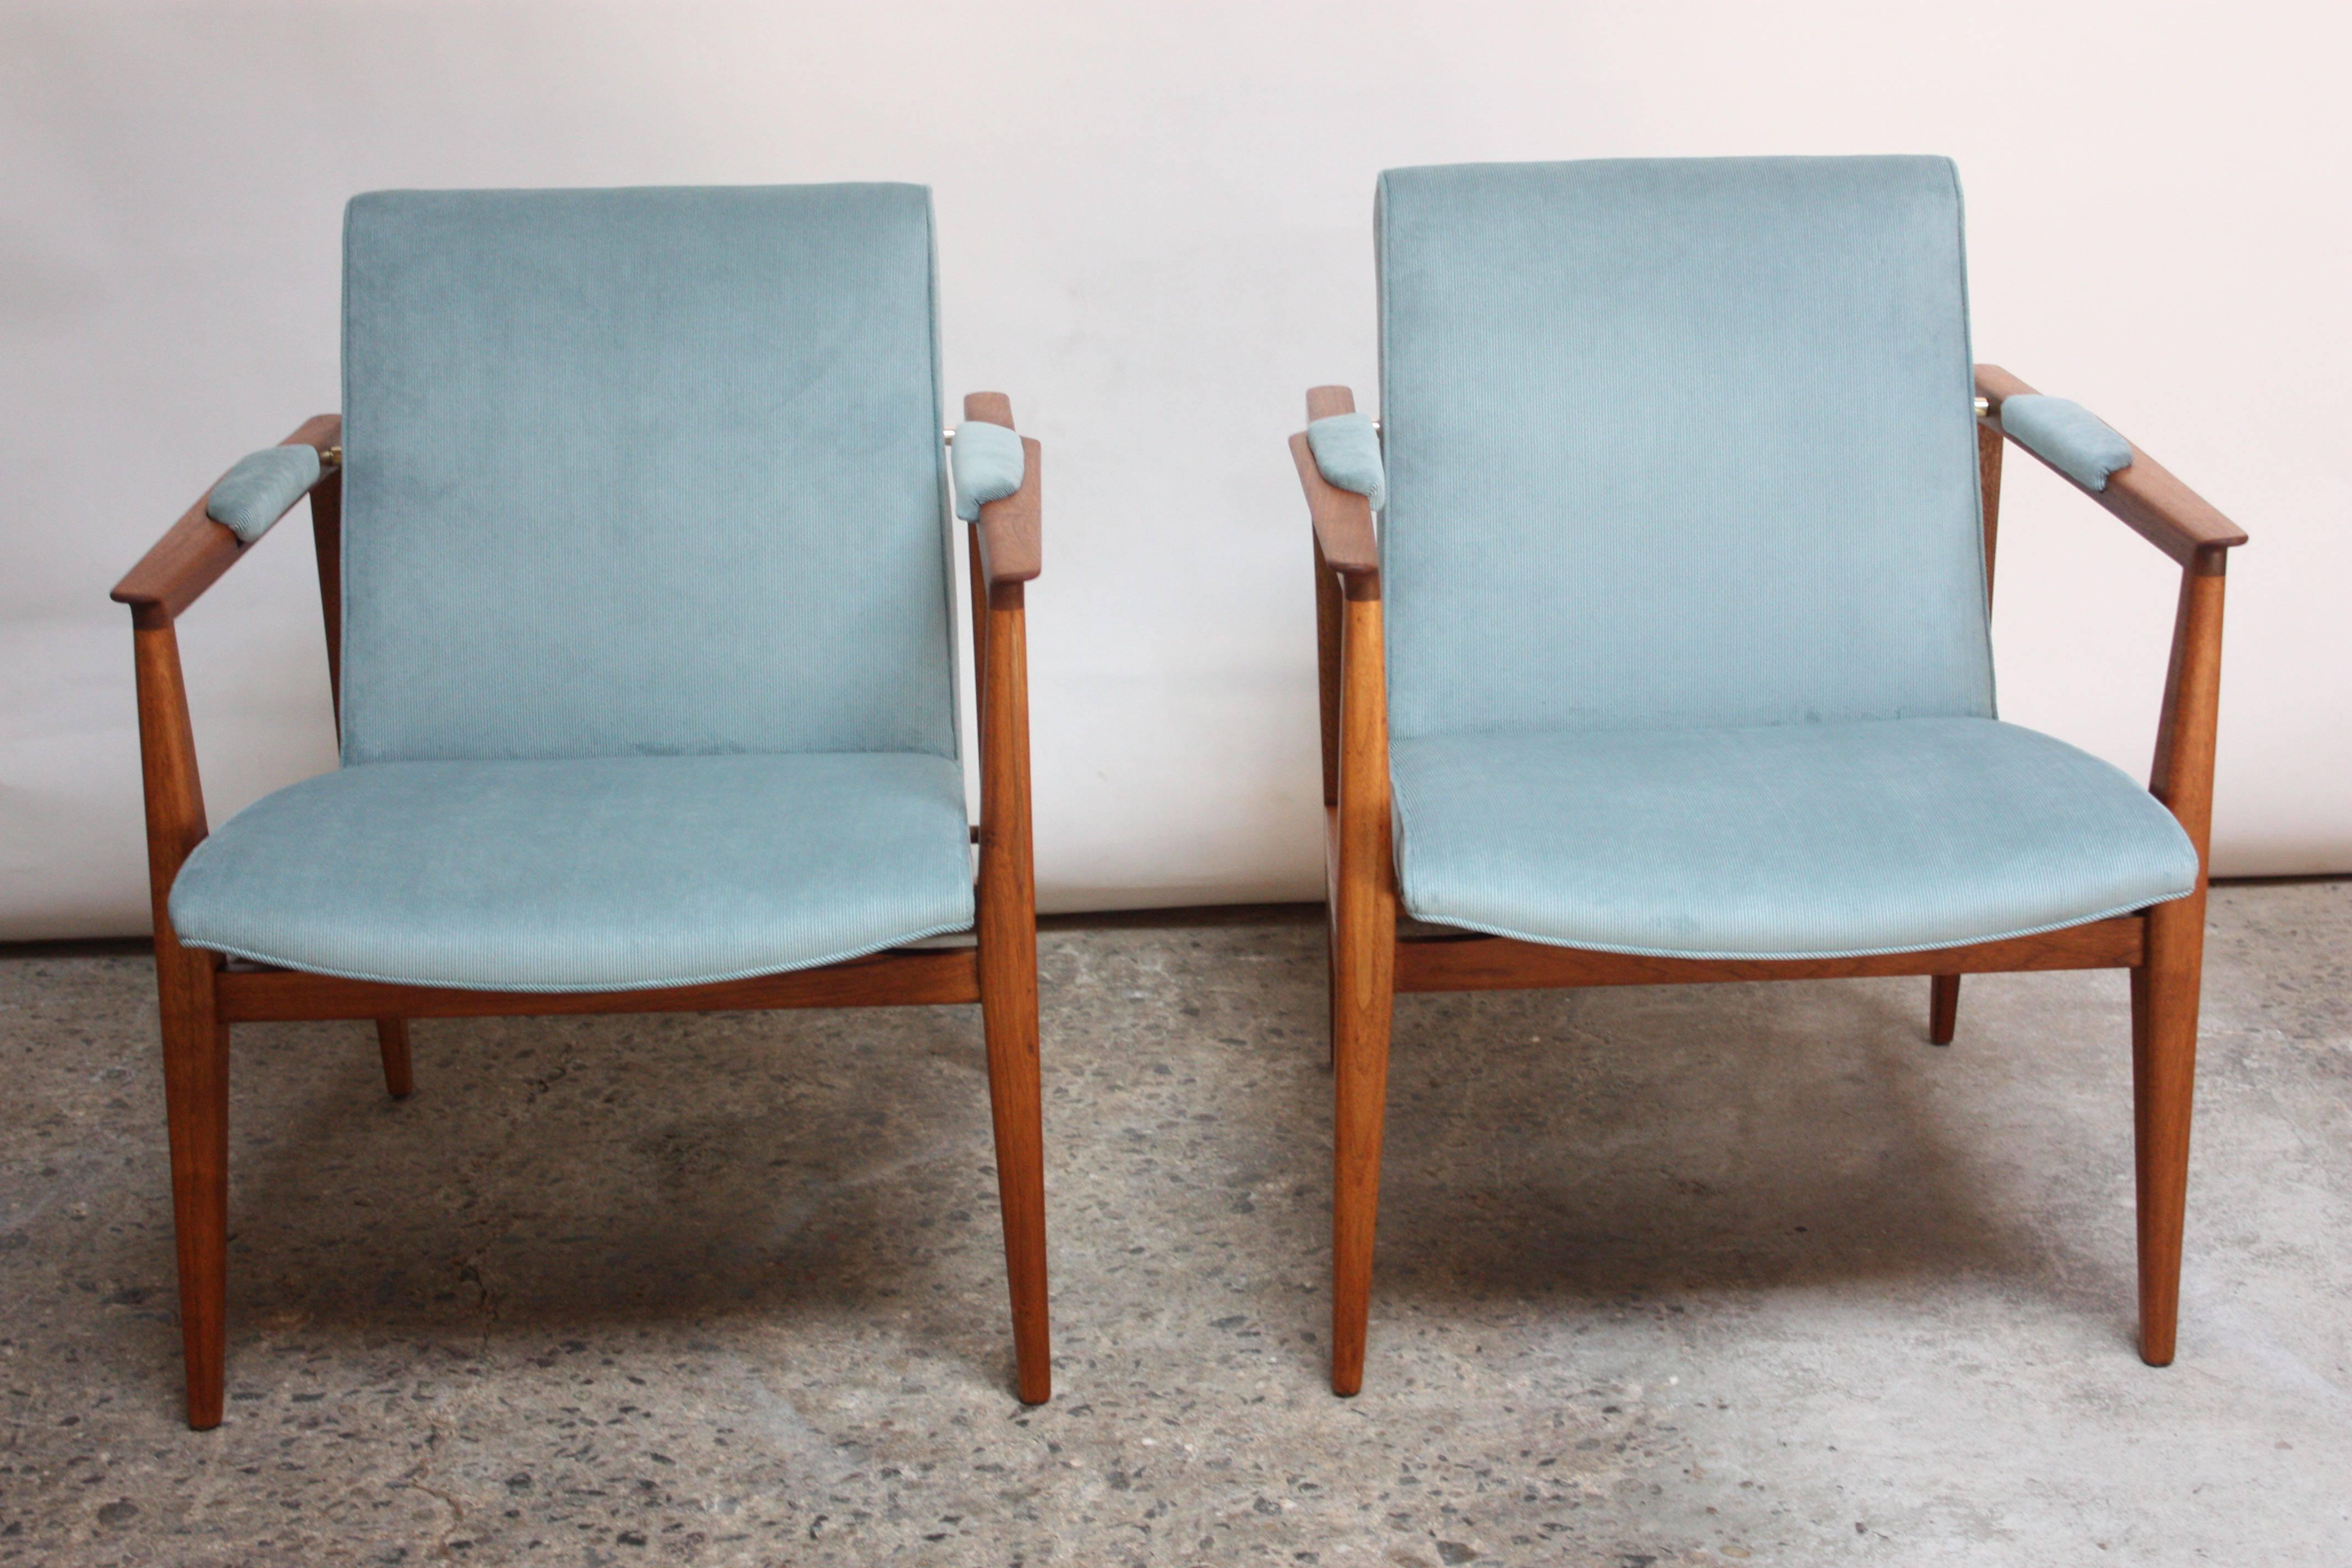 Polished Pair of Edward Wormley for Dunbar Armchairs in Mahogany